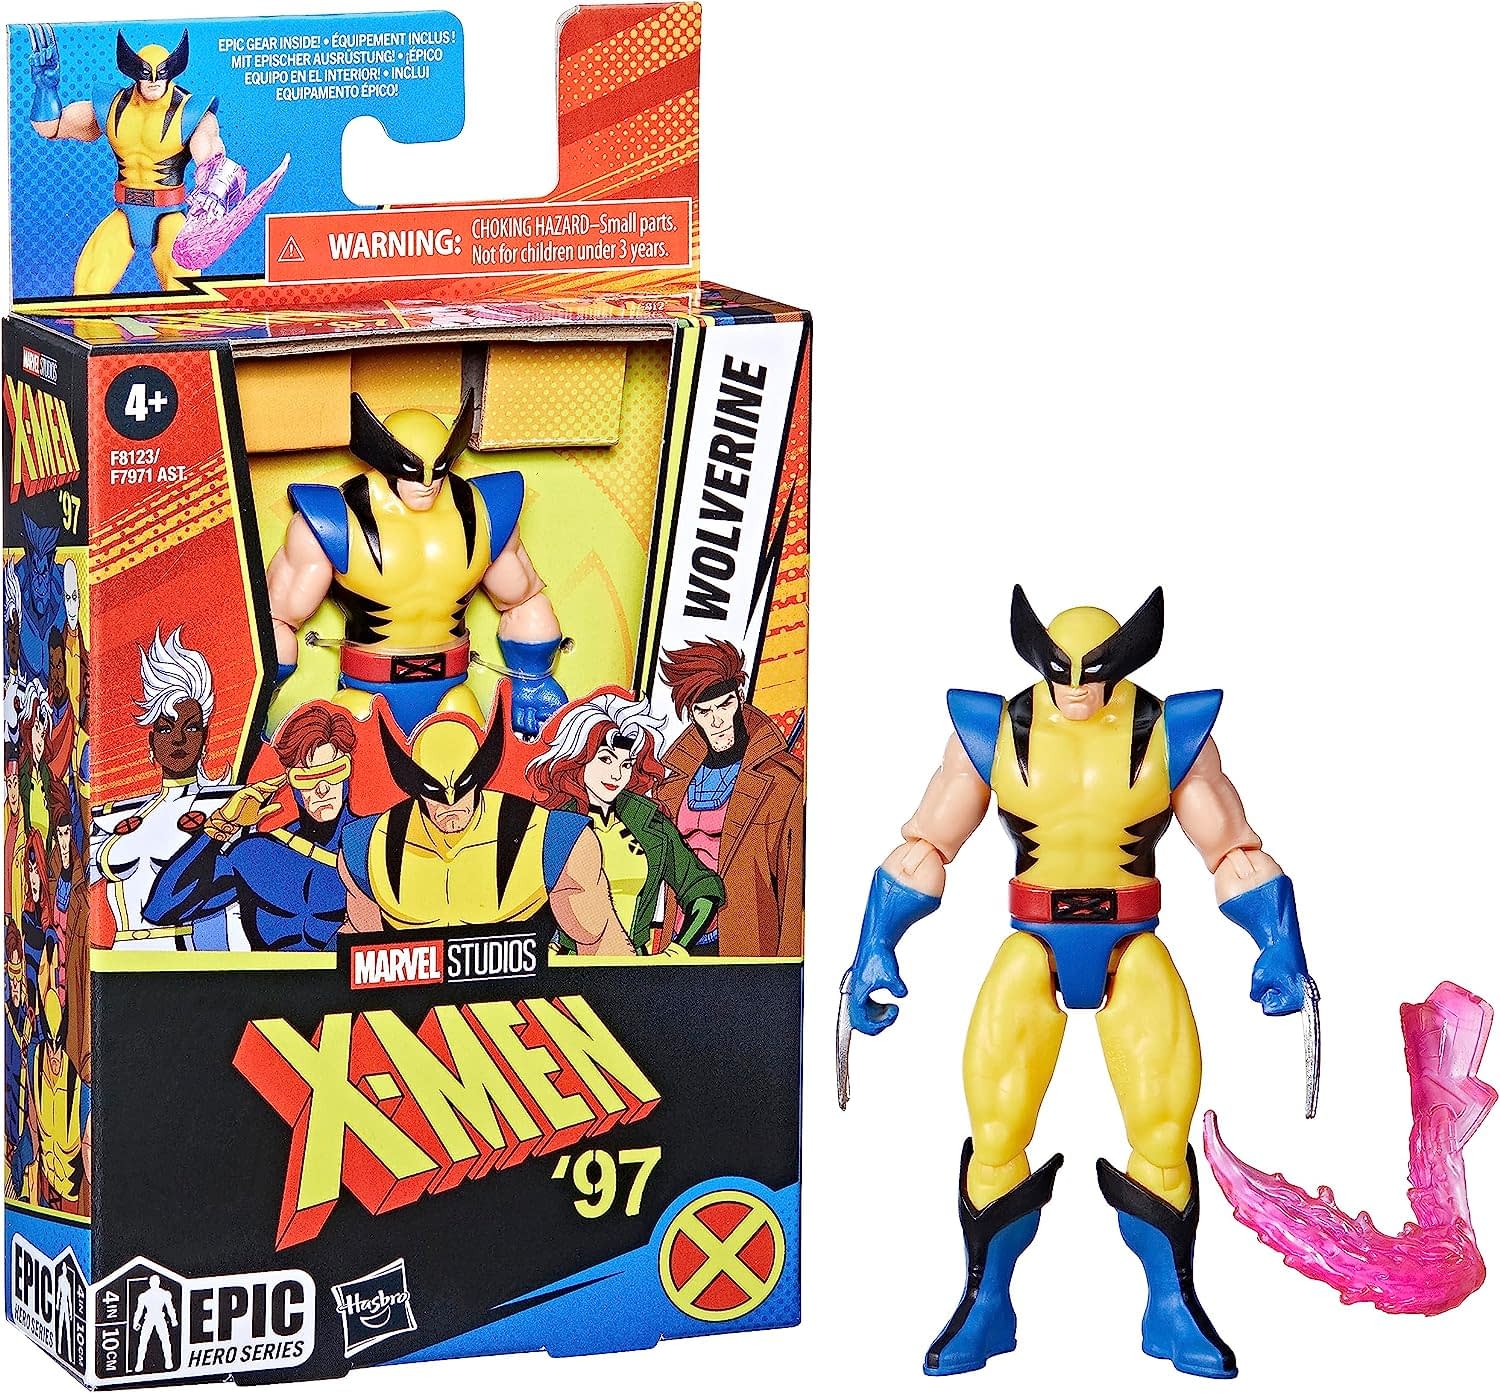 New Wolverine Collectibles Revealed from Hasbro for XMen 97’ Cartoon